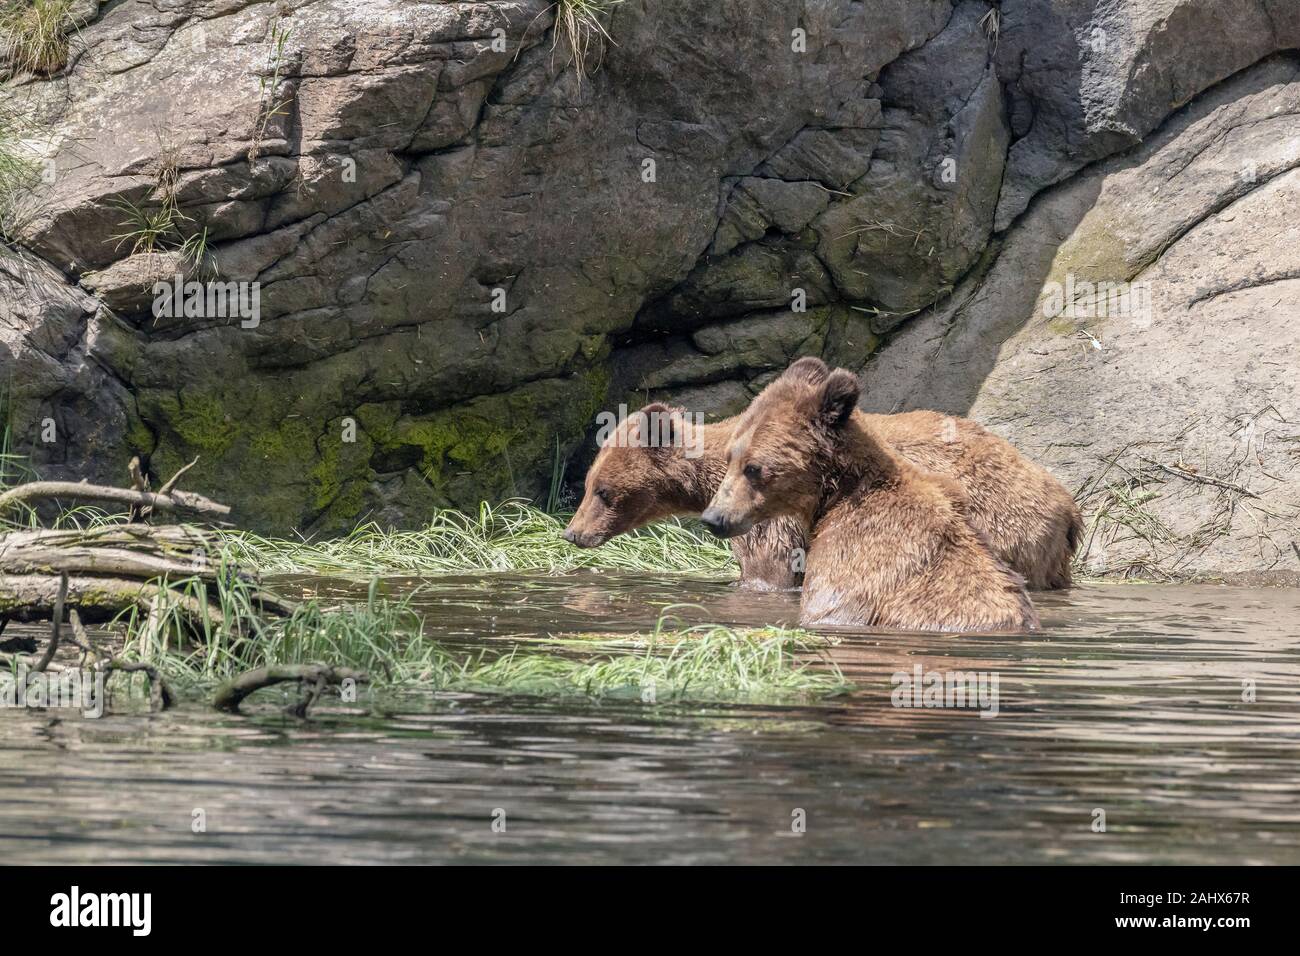 Mother grizzly with 3-4 year old cub in the water at high tide in the Khutzeymateen estuary, British Columbia Stock Photo